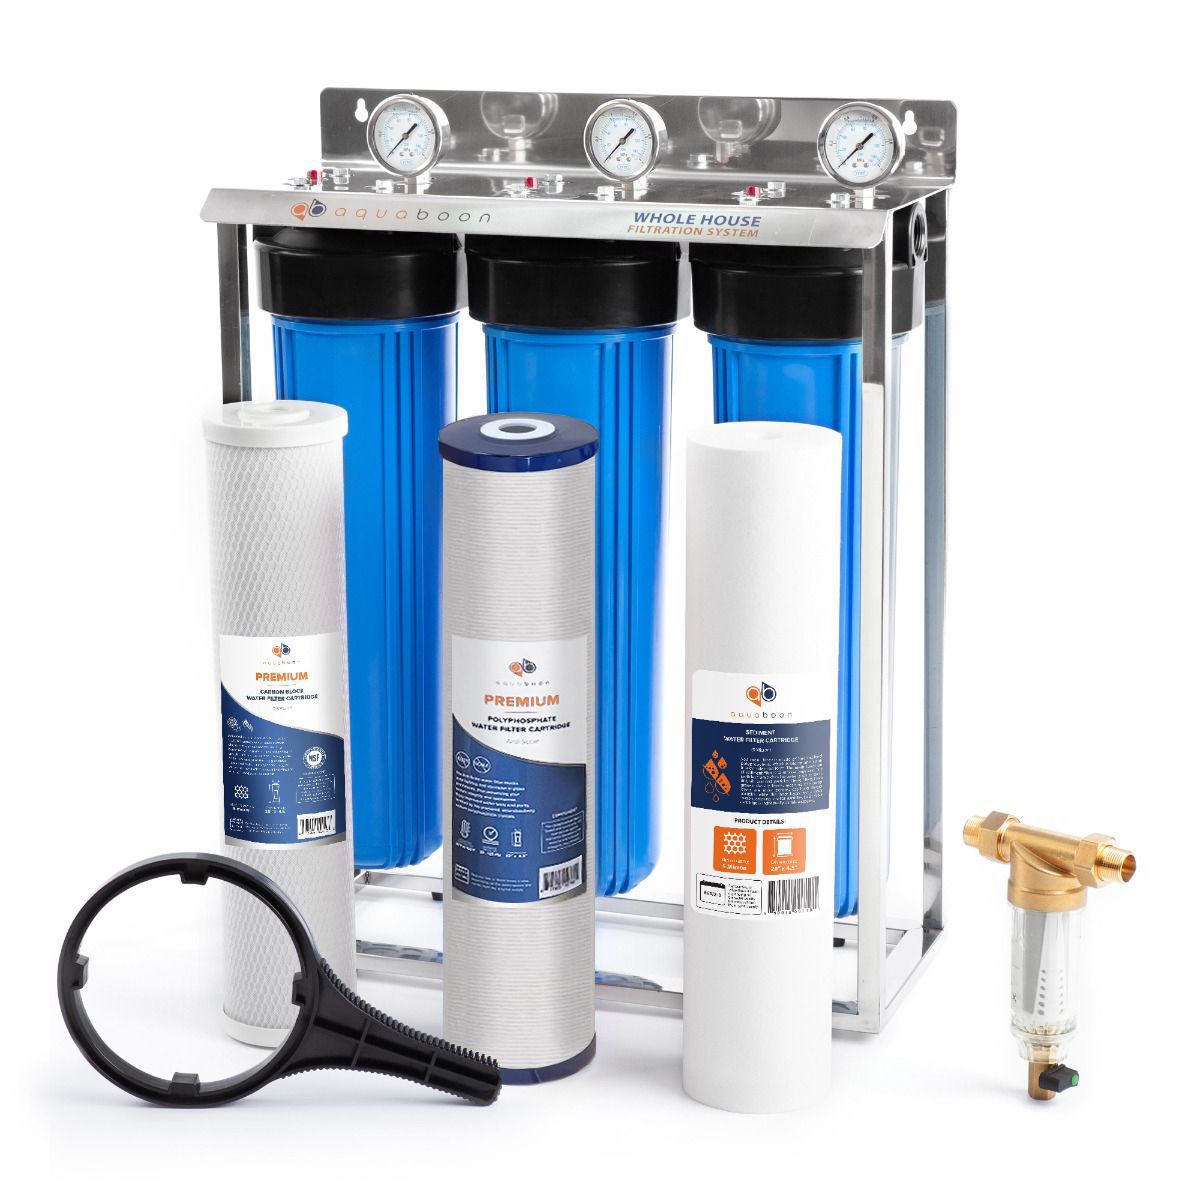 Aquaboon Whole House 3-Stage 20" Water Filtration System For Anti-scale Filtration (Carbon, Polyphosphate, Sediment Filters) on Stainless Steel Stand AB-3WHS20BB-1C20BB5MP-1PPH20BB5M-1S20BB5M